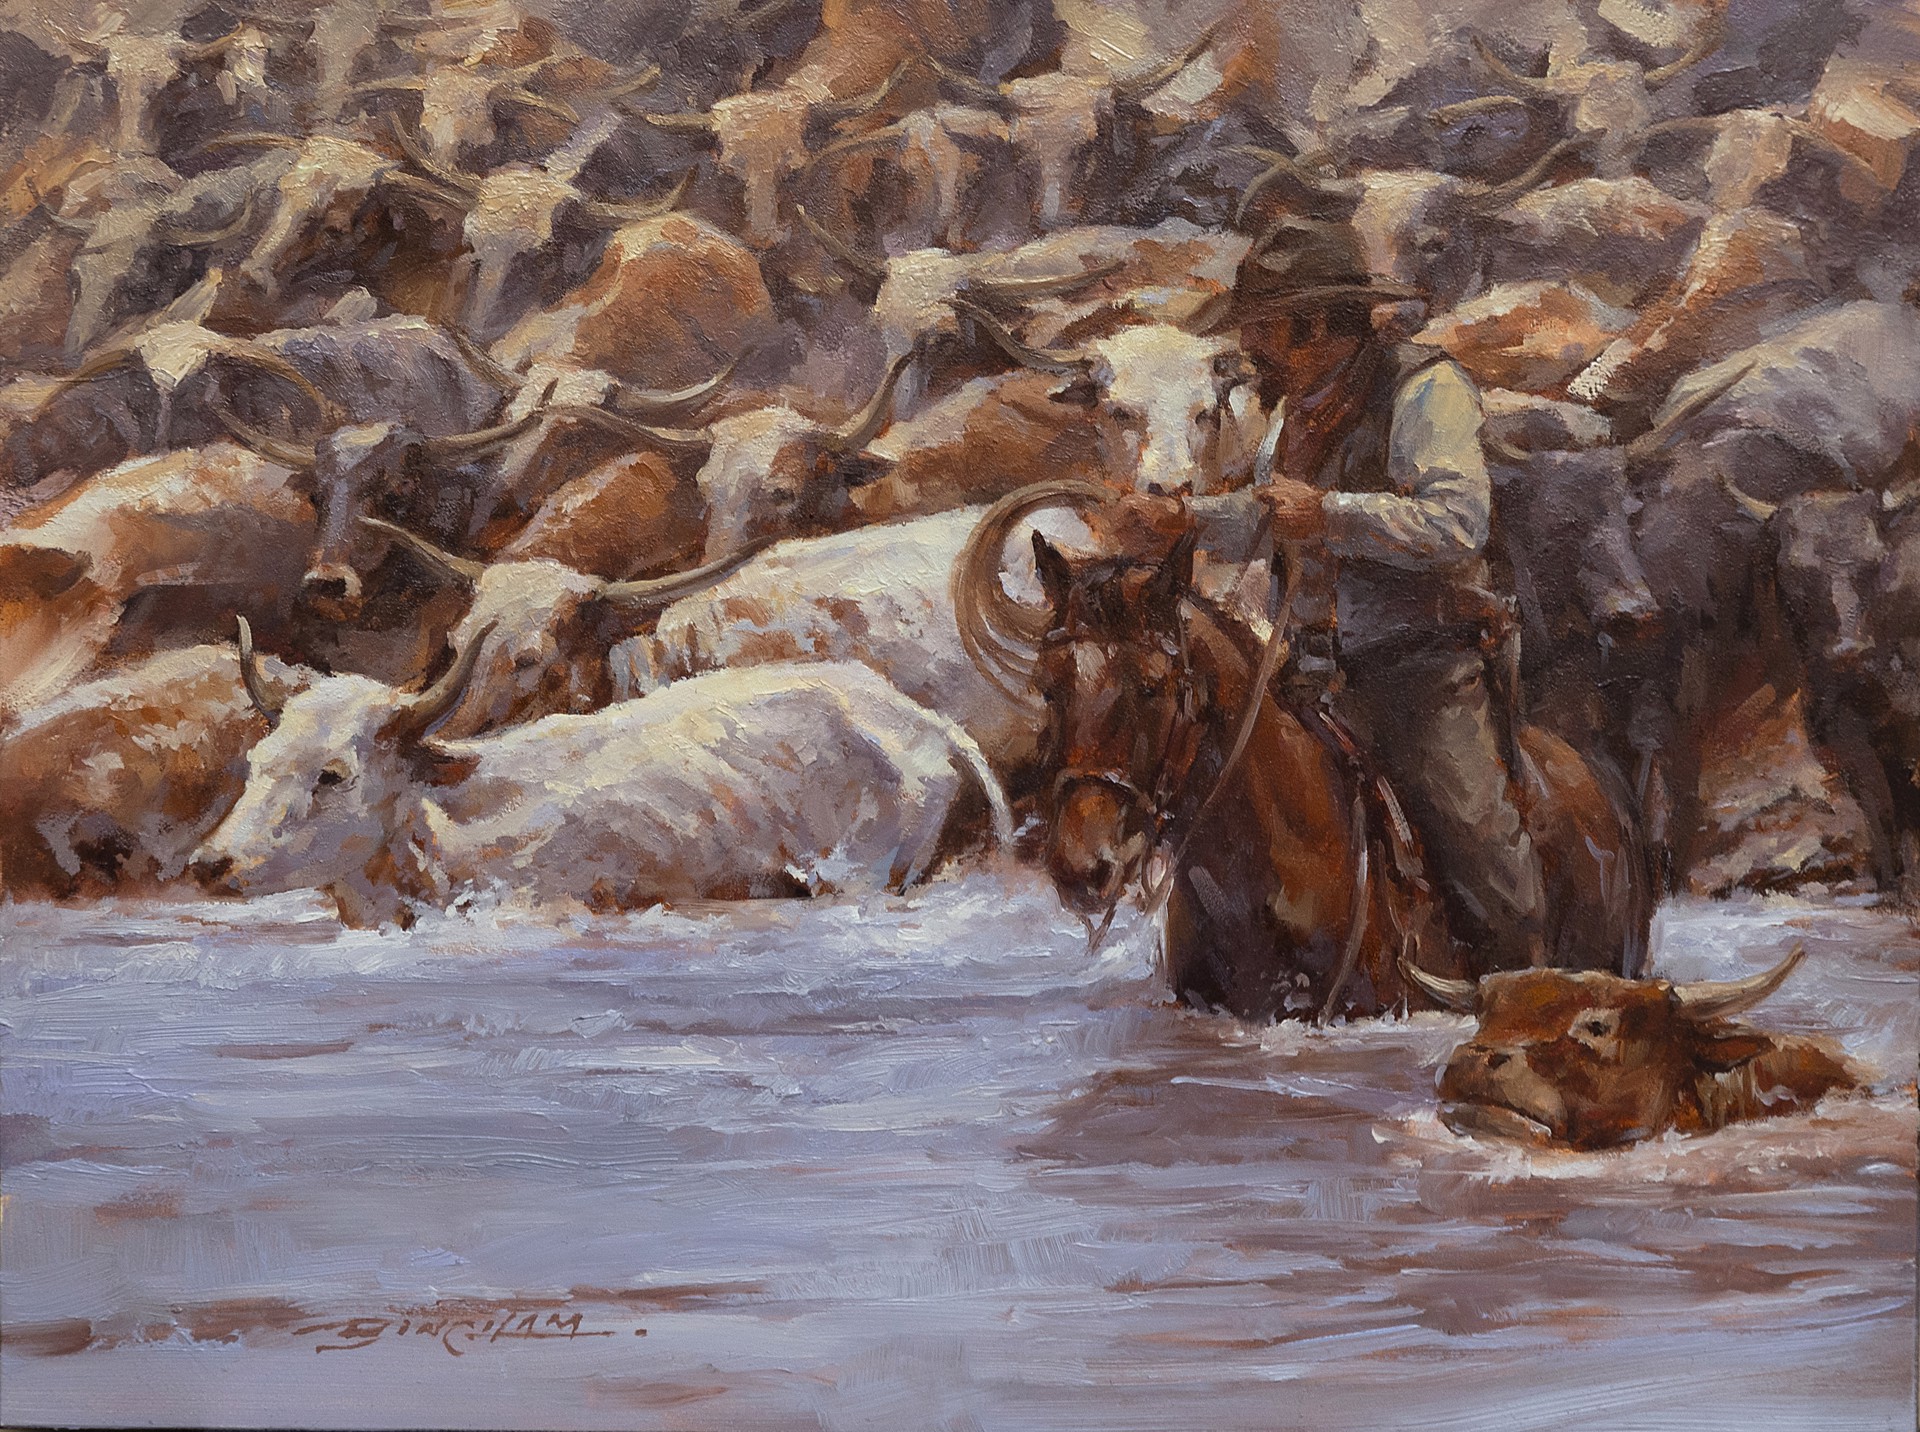 Goin' to Market by Jerry Bingham